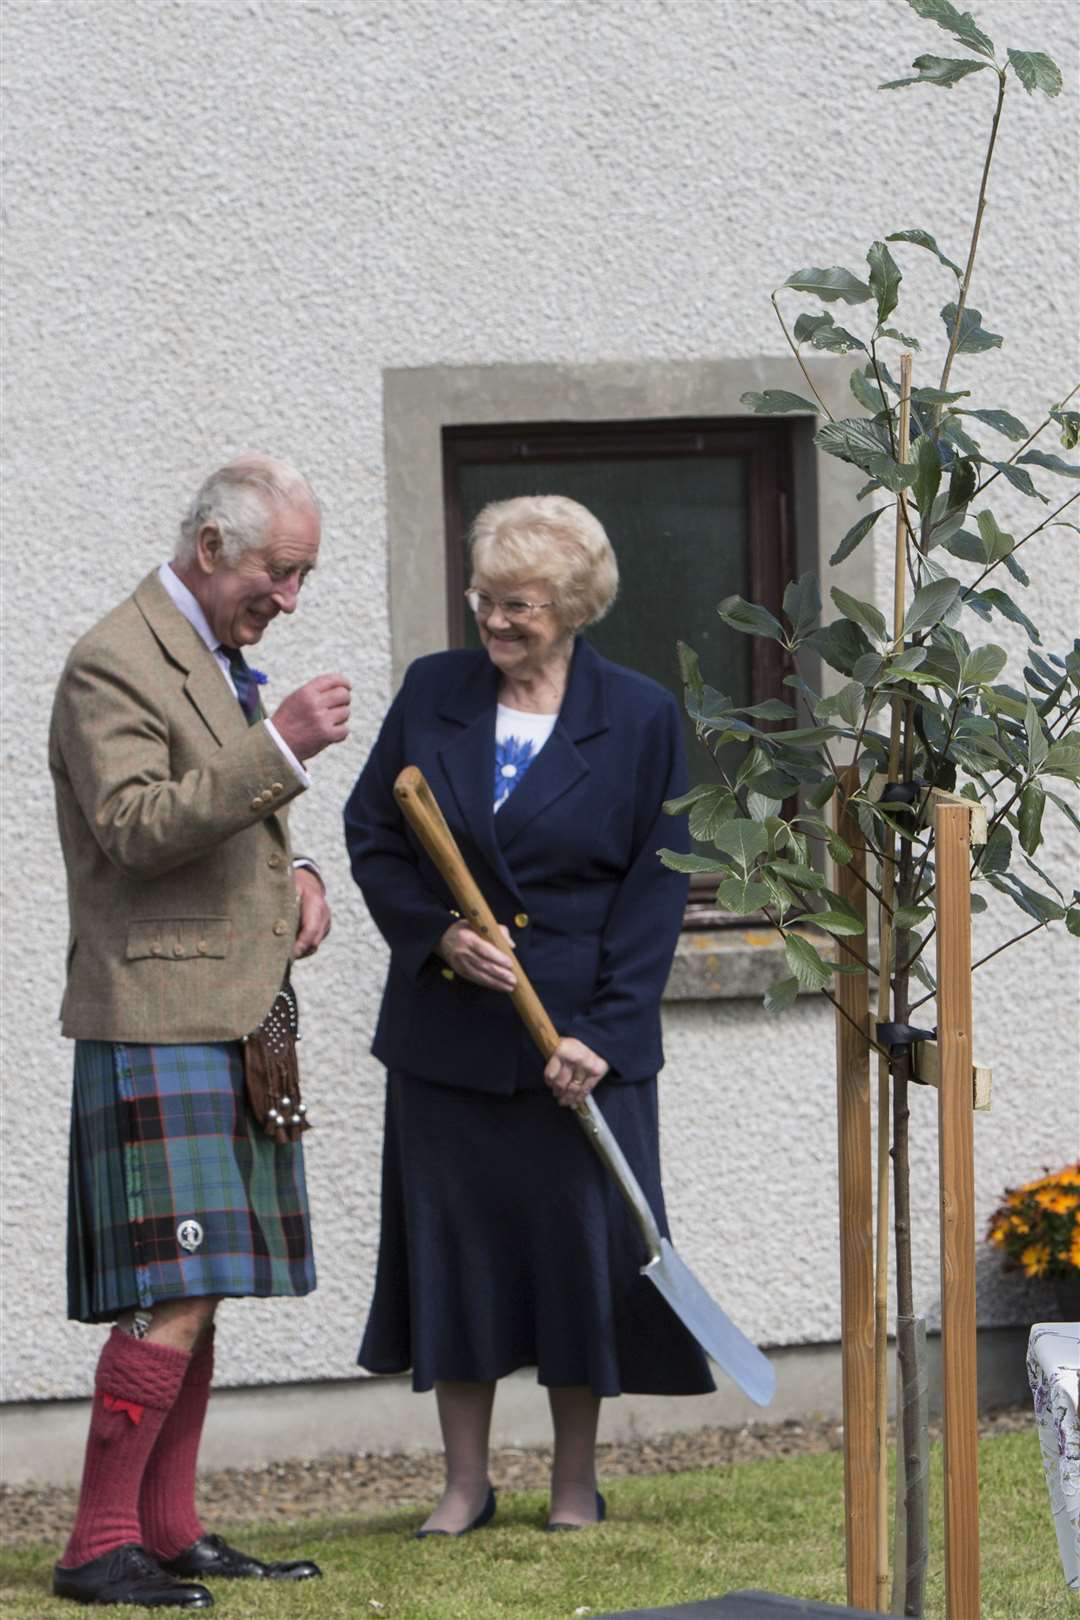 King Charles chats with Christine Shearer before planting a tree in the grounds of the Church Hall. Photo: Mandy MacDonald/Northern Studios